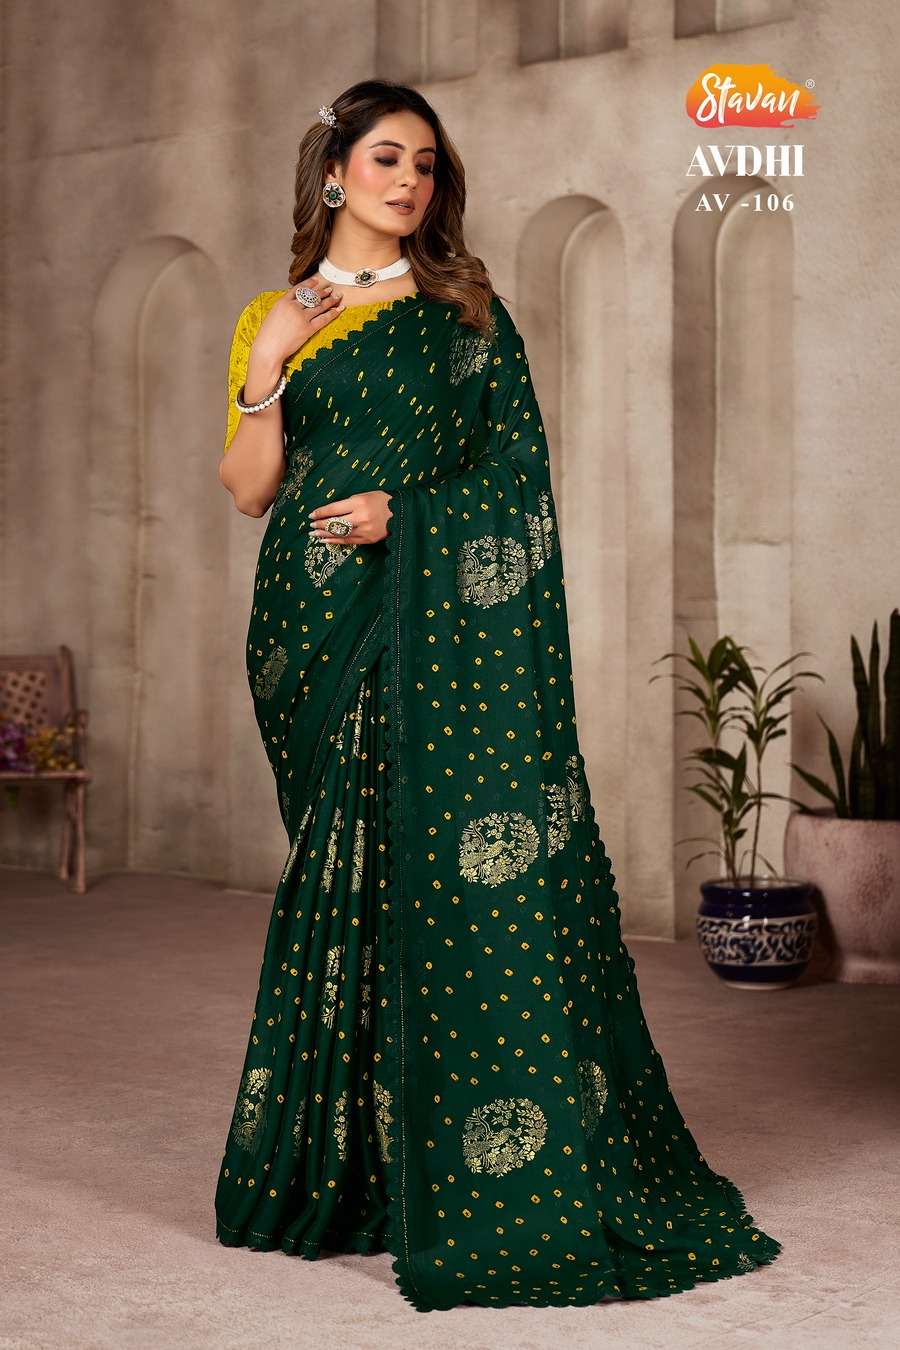 stavan present avdhi amazing fancy saree with contrast blouse collection